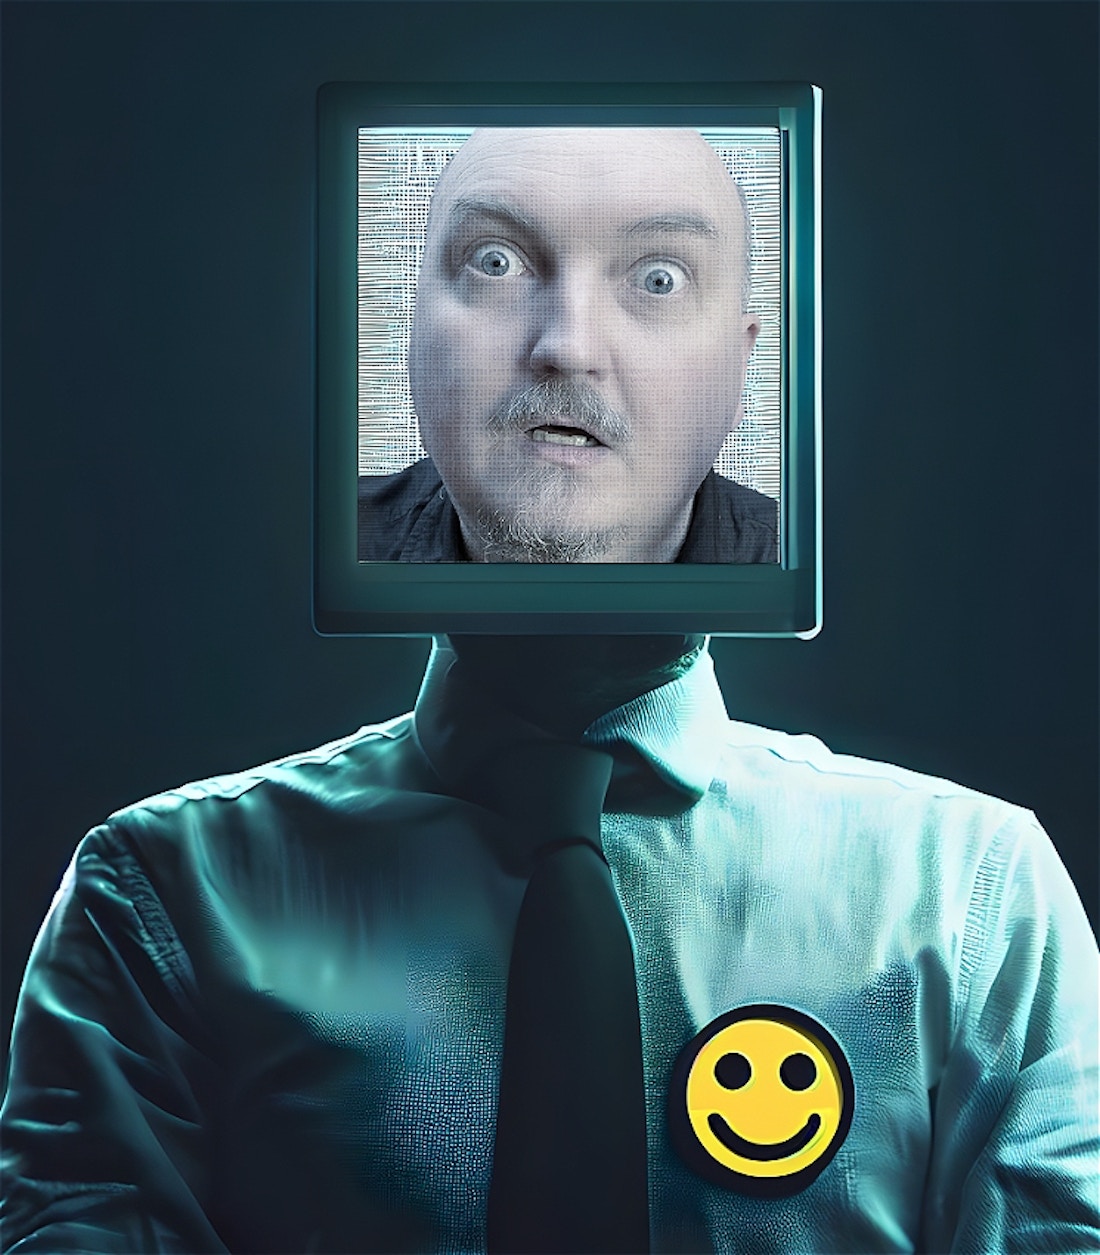 Adam trapped inside a man who has a computer for a face.